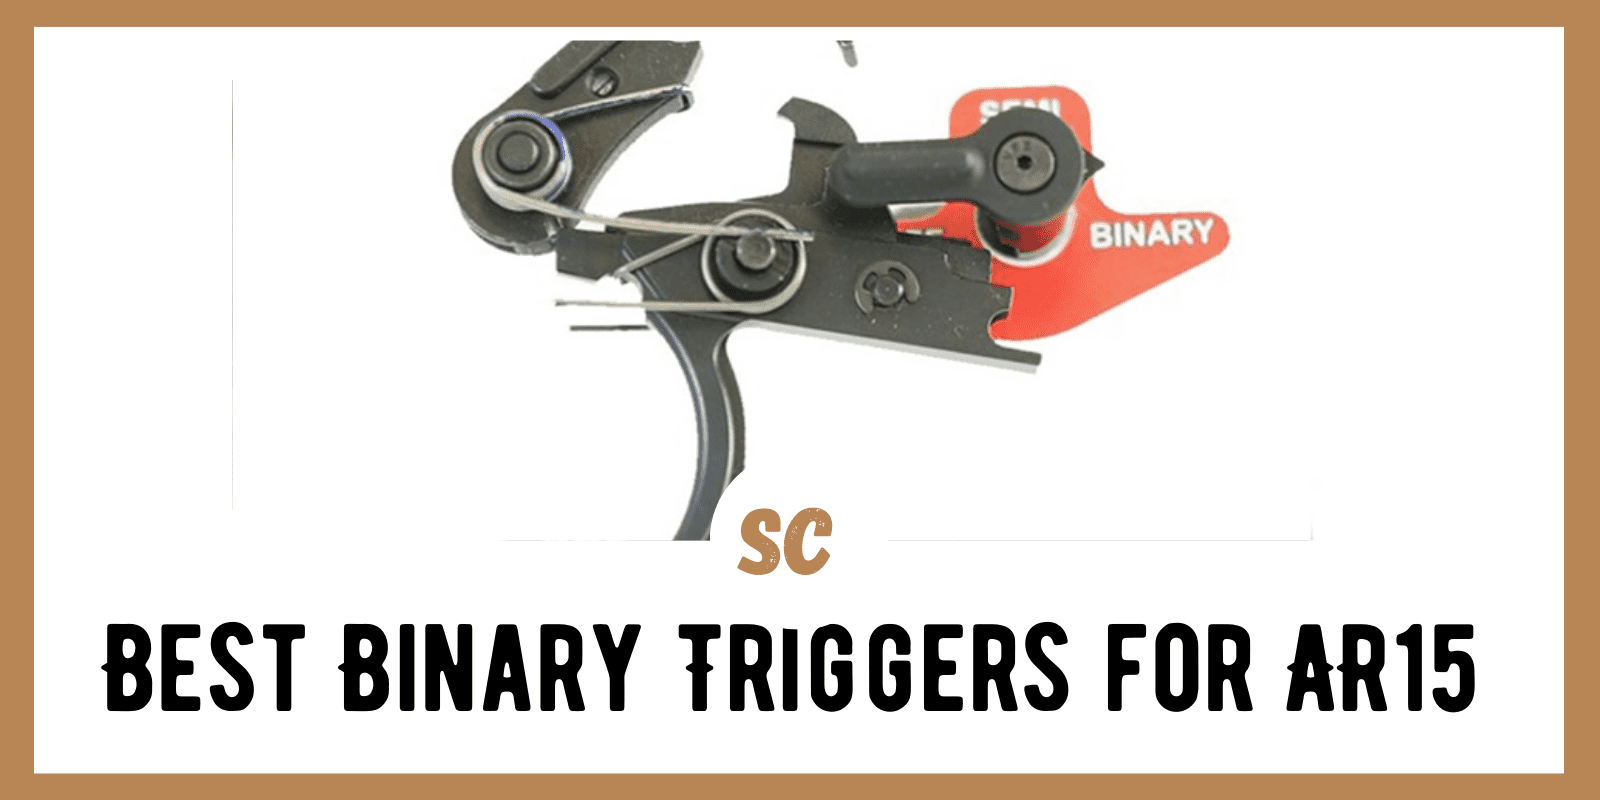 Best Binary Triggers for AR15: Top 2 Picks